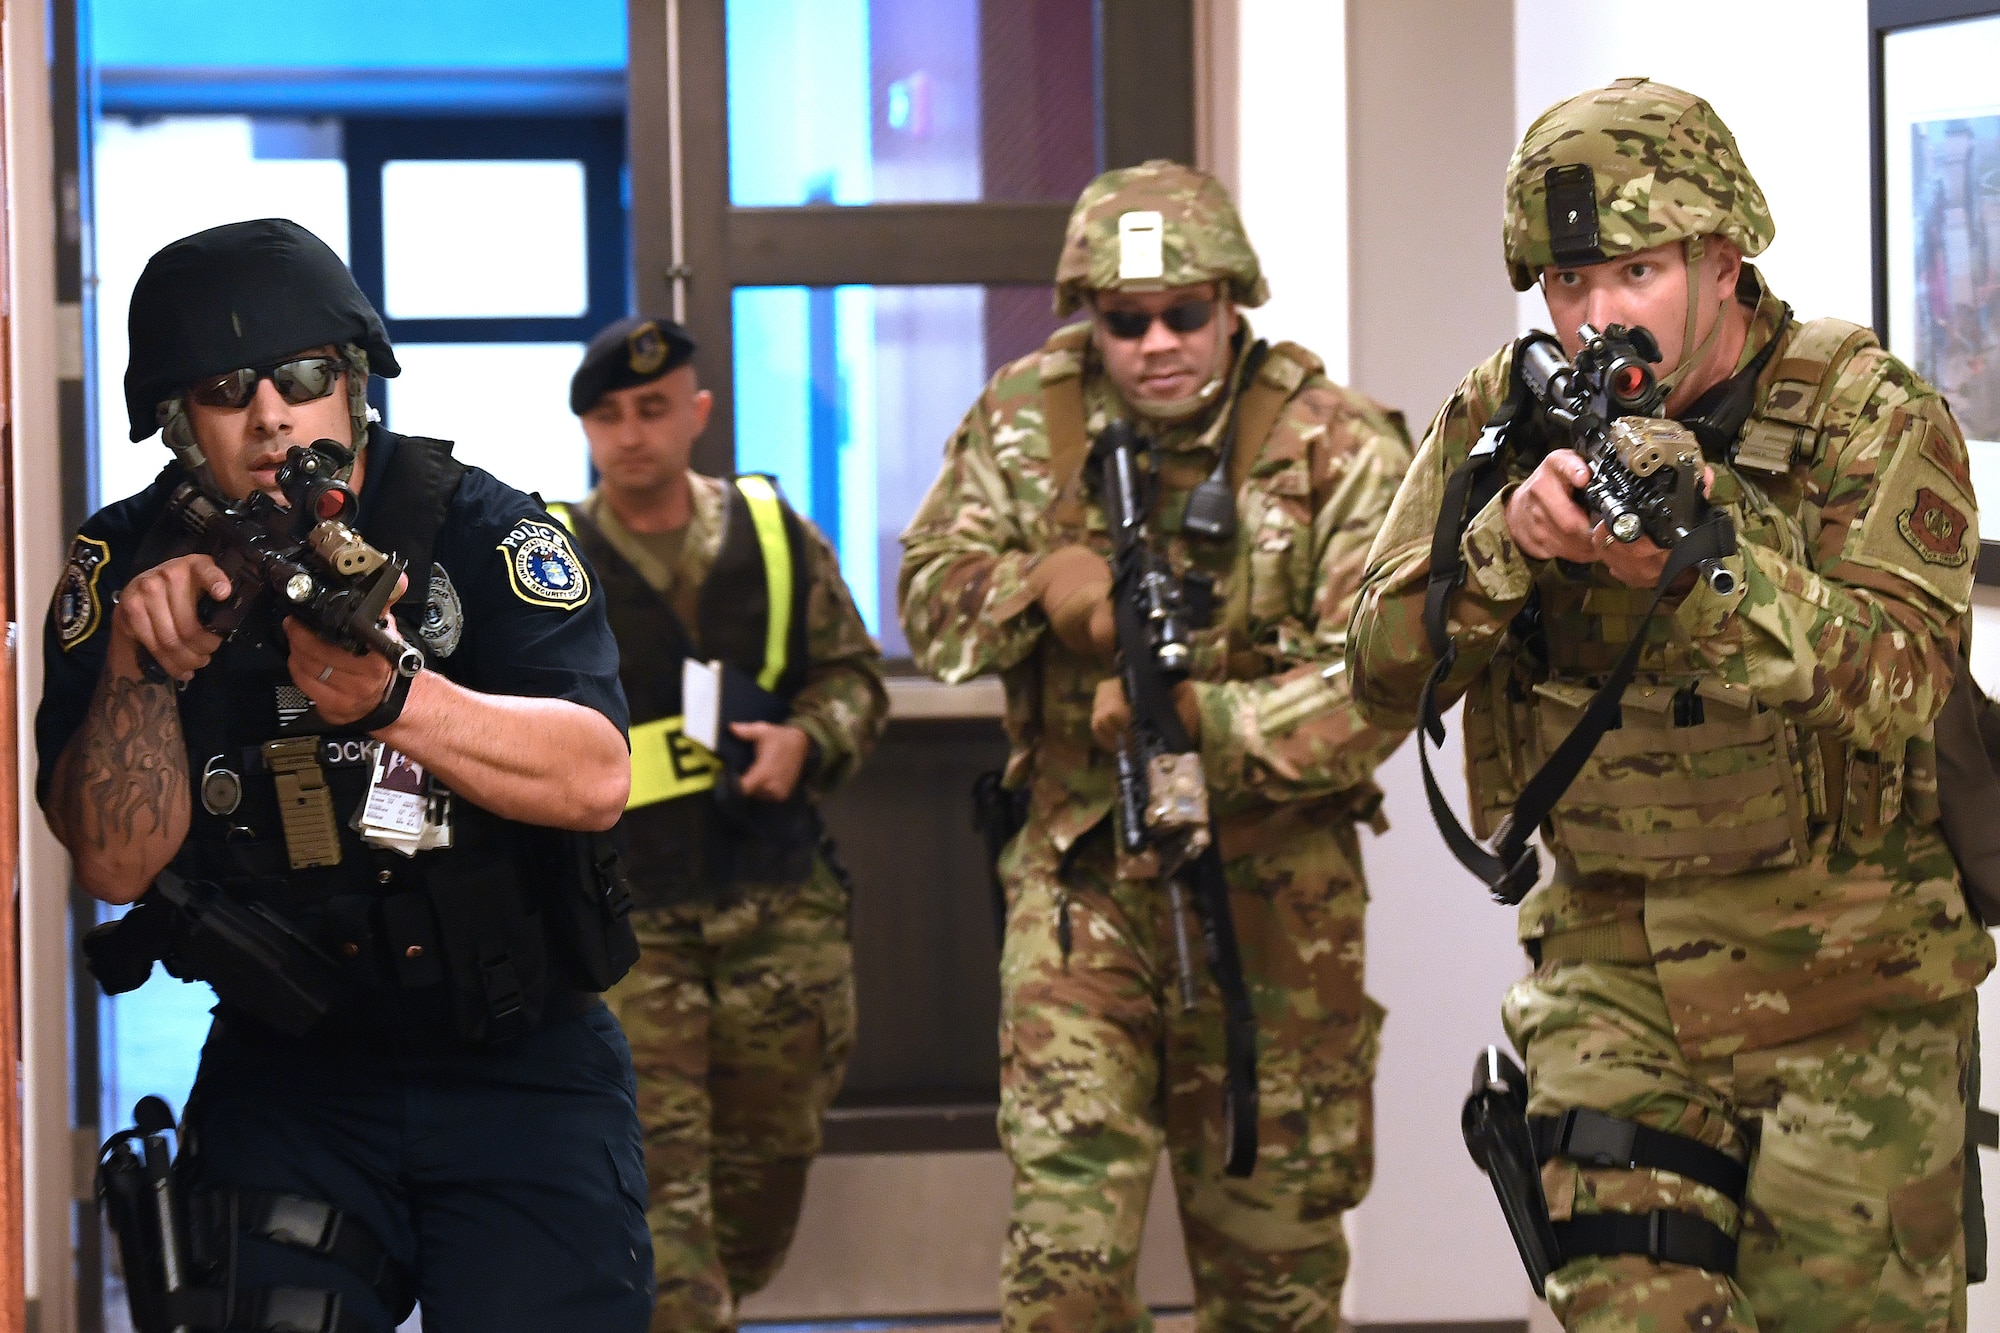 SCHRIEVER AIR FORCE BASE, Colo.--50th Security Forces Squadron members respond to a simulated threat scenario during the Front Range Expeditionary Exercise in Building 210 at Schriever Air Force Base, Colorado, April 25, 2019. Actions carried out by 50th SFS members in exercise and in real time are supported by the efforts of the 50th SFS anti-terrorism flight, who are responsible for maintaining the force protection measures for all of Schriever AFB as well as off-site facilities within the Front Range and geographically separated units around the world. (U.S. Air Force photo by Dennis Rogers)